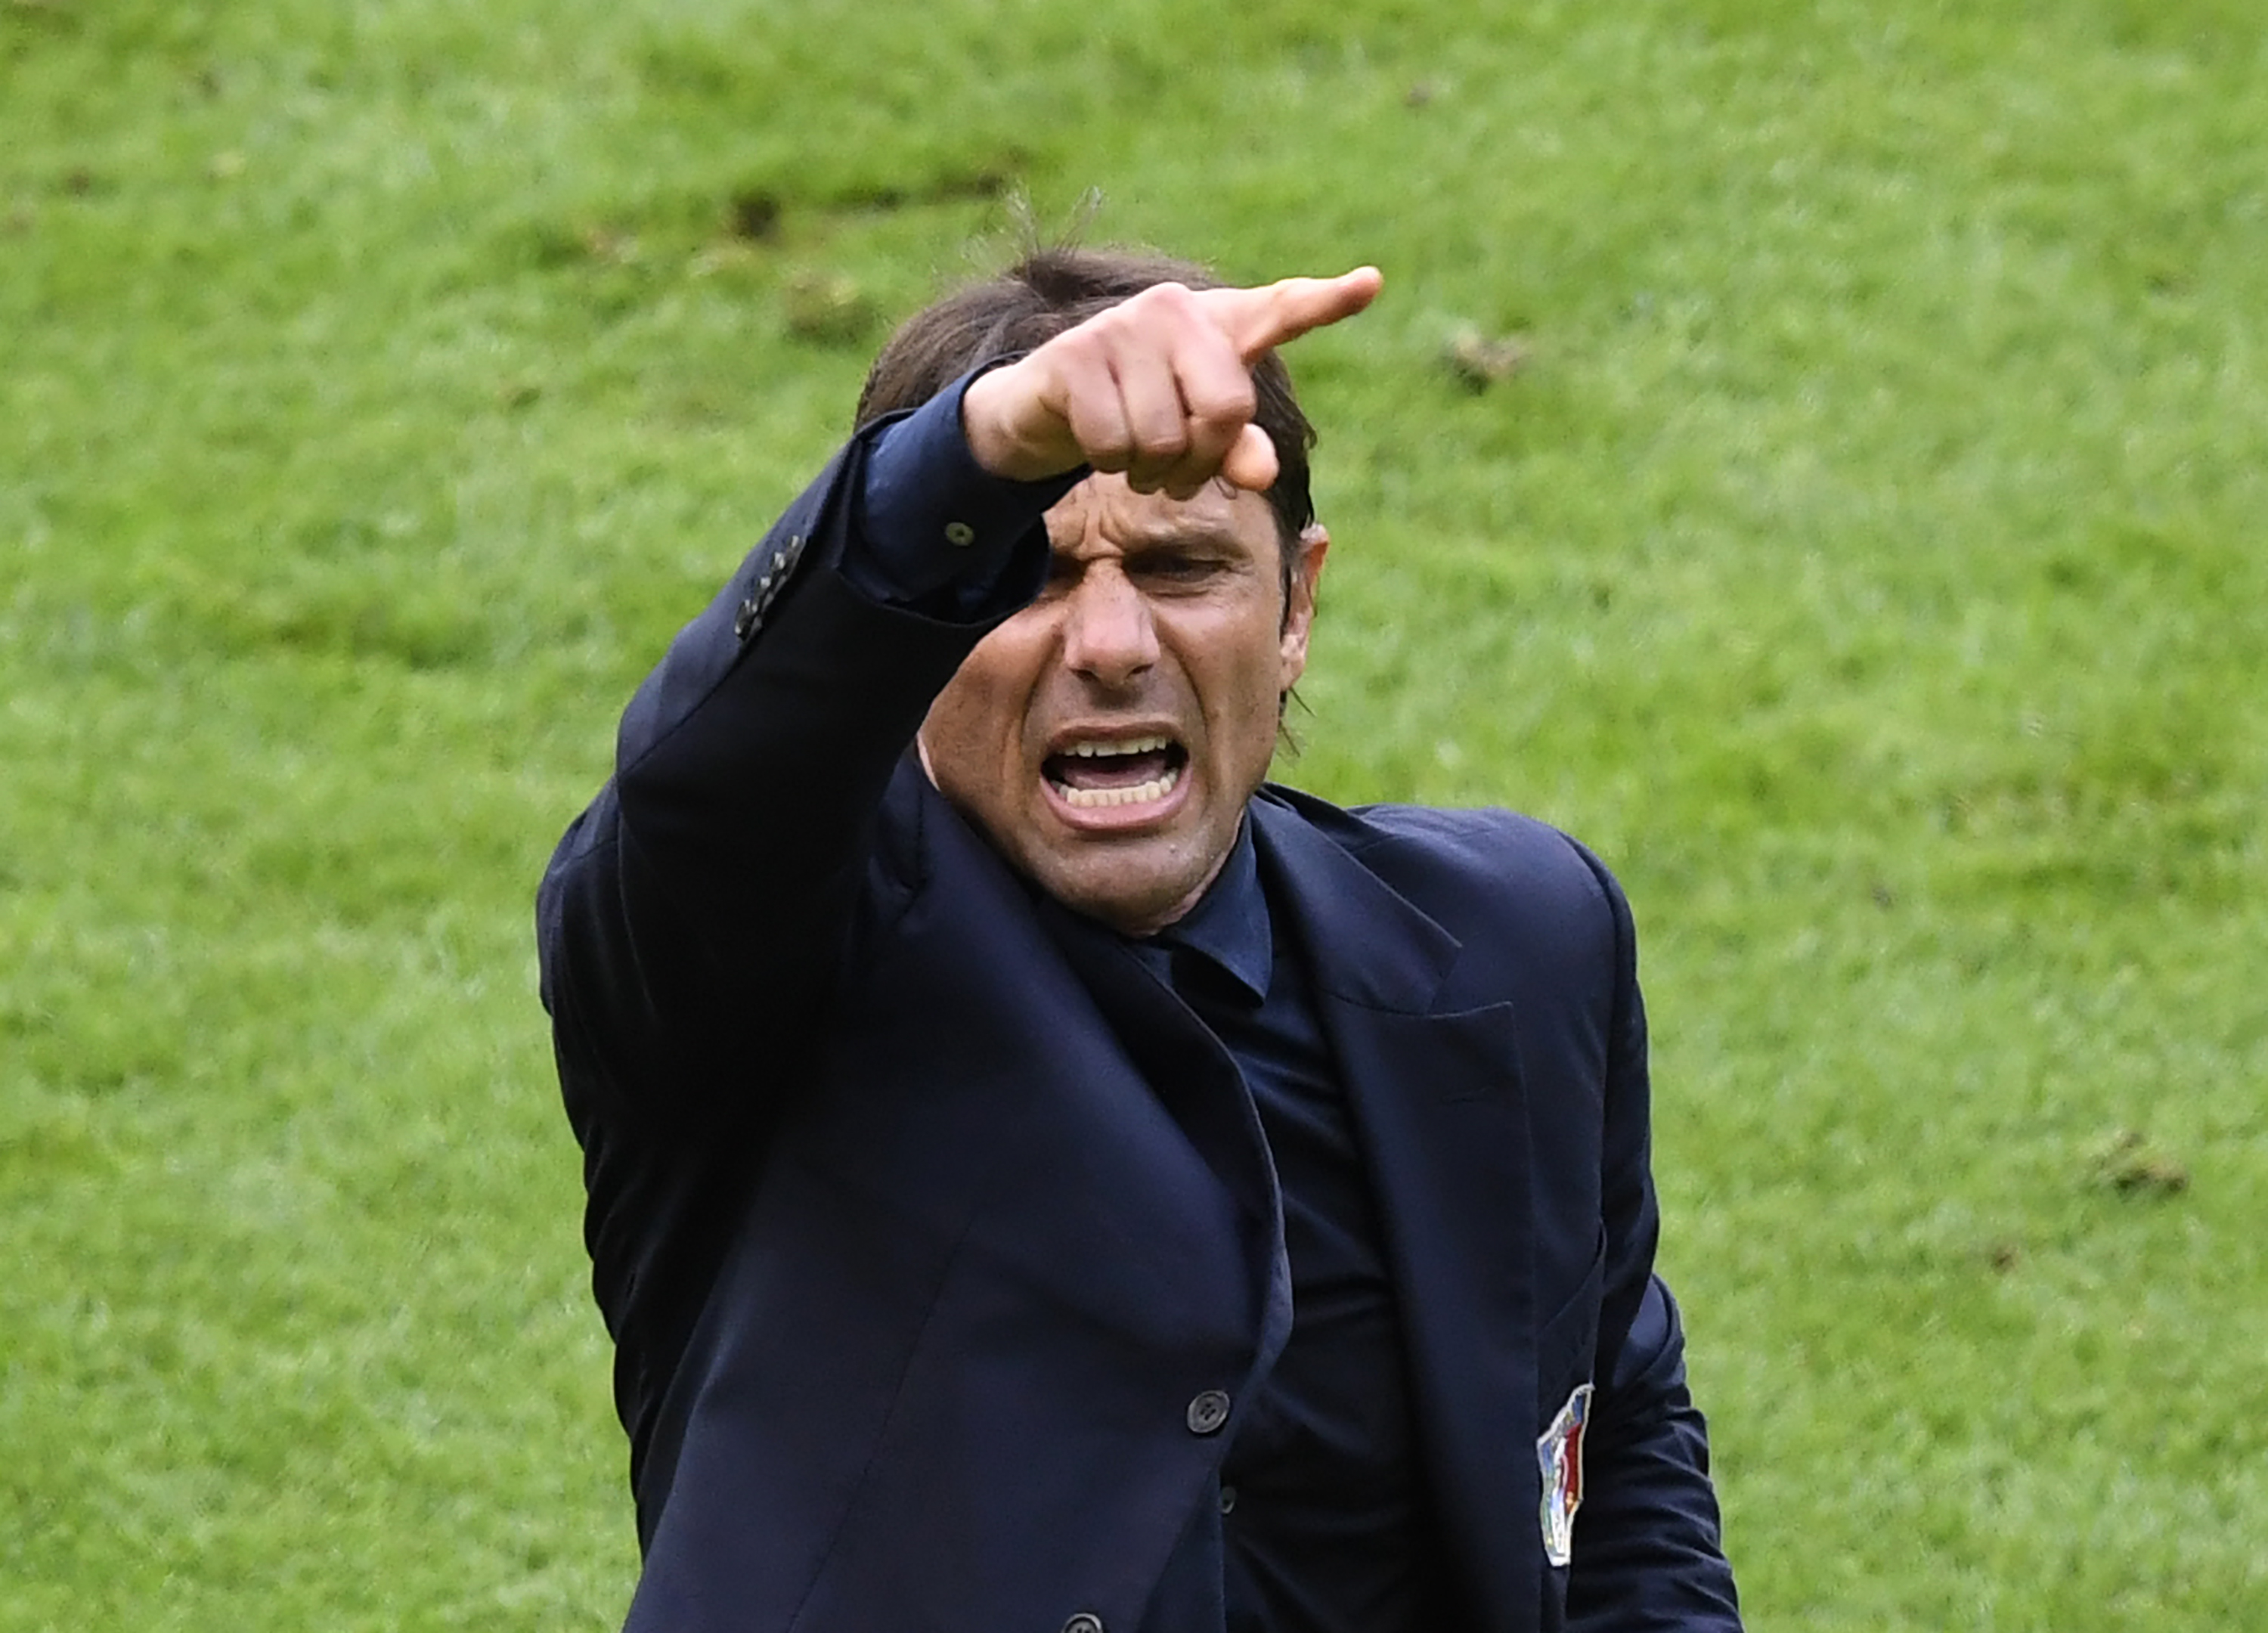 Italy's coach Antonio Conte gestures during Euro 2016 round of 16 football match between Italy and Spain at the Stade de France stadium in Saint-Denis, near Paris, on June 27, 2016.   / AFP / MIGUEL MEDINA        (Photo credit should read MIGUEL MEDINA/AFP/Getty Images)